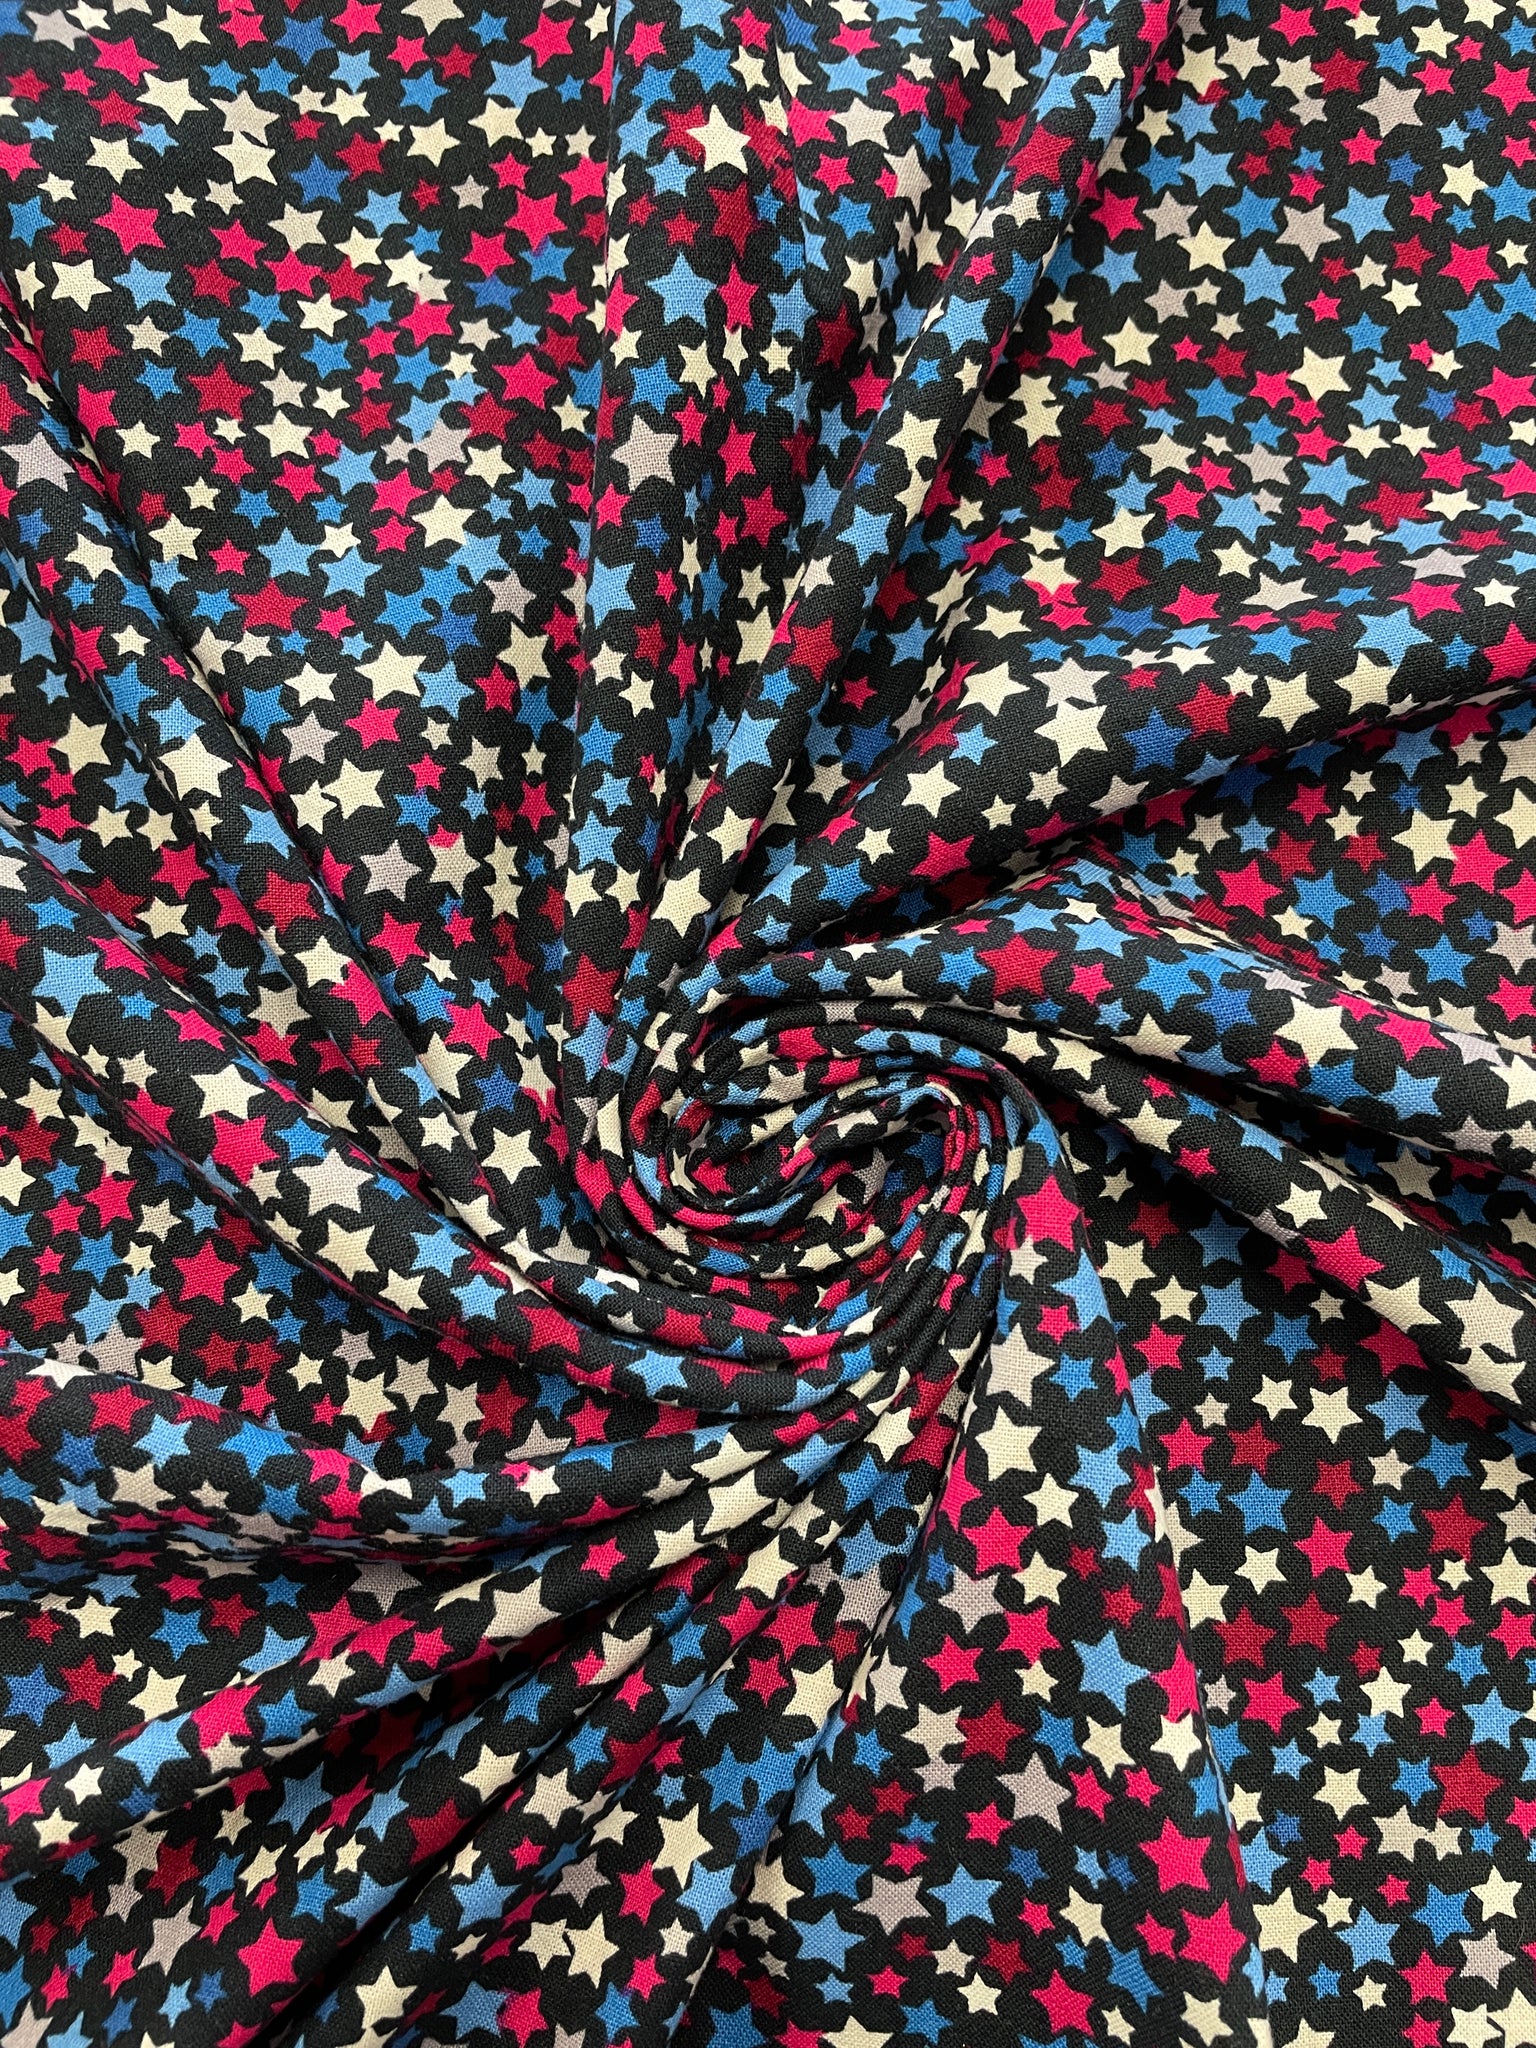 3/4 YD Quilting Cotton - Red, White and Blue Stars on Navy Blue